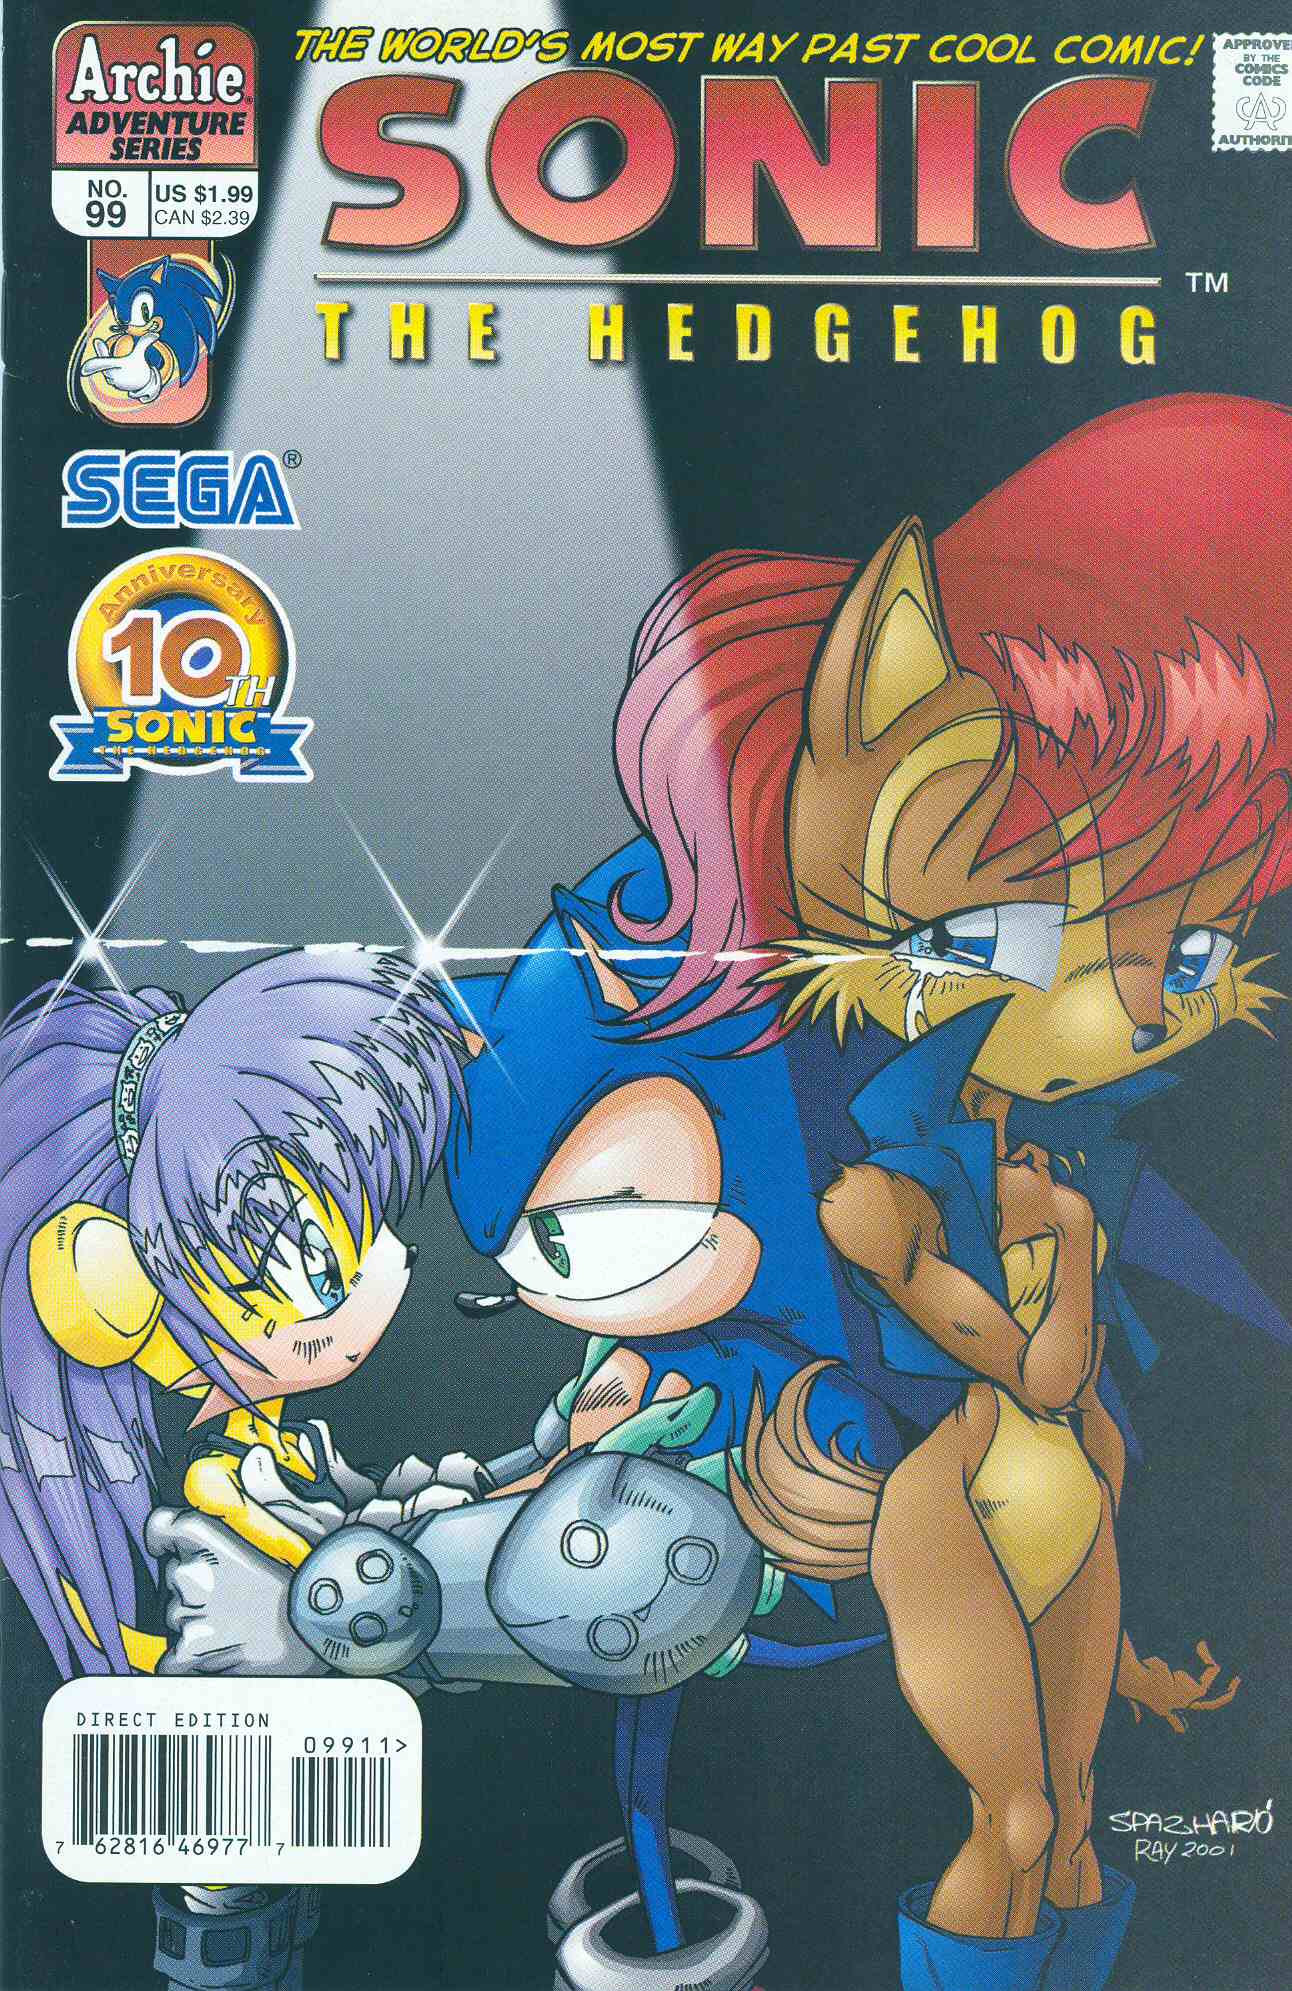 Sonic - Archie Adventure Series August 2001 Comic cover page